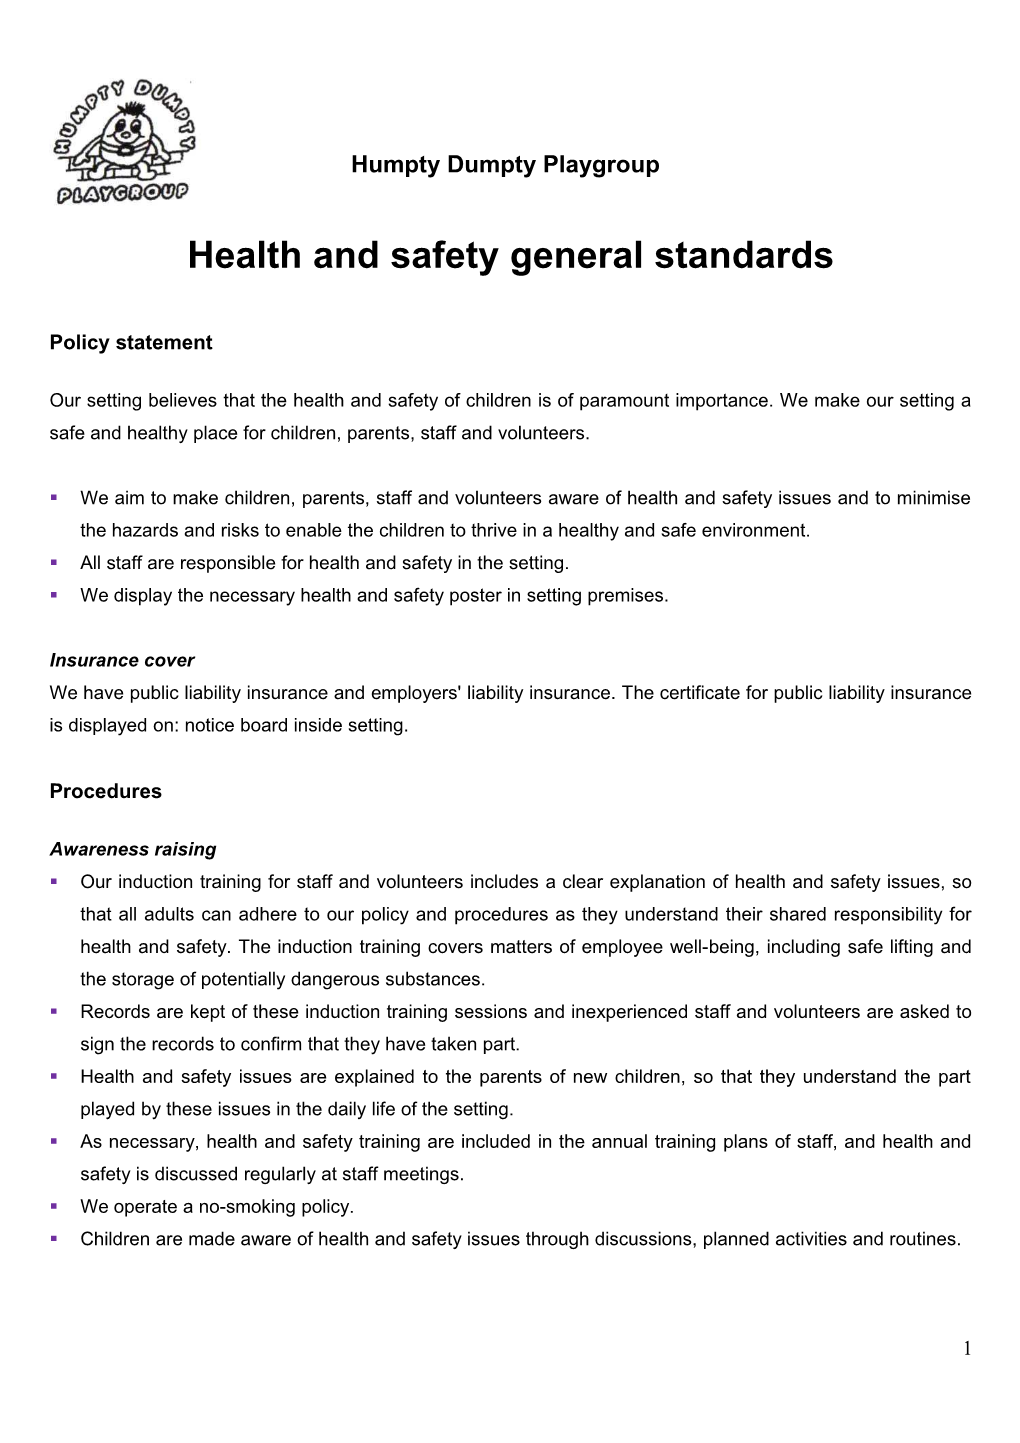 Health and Safety General Standards